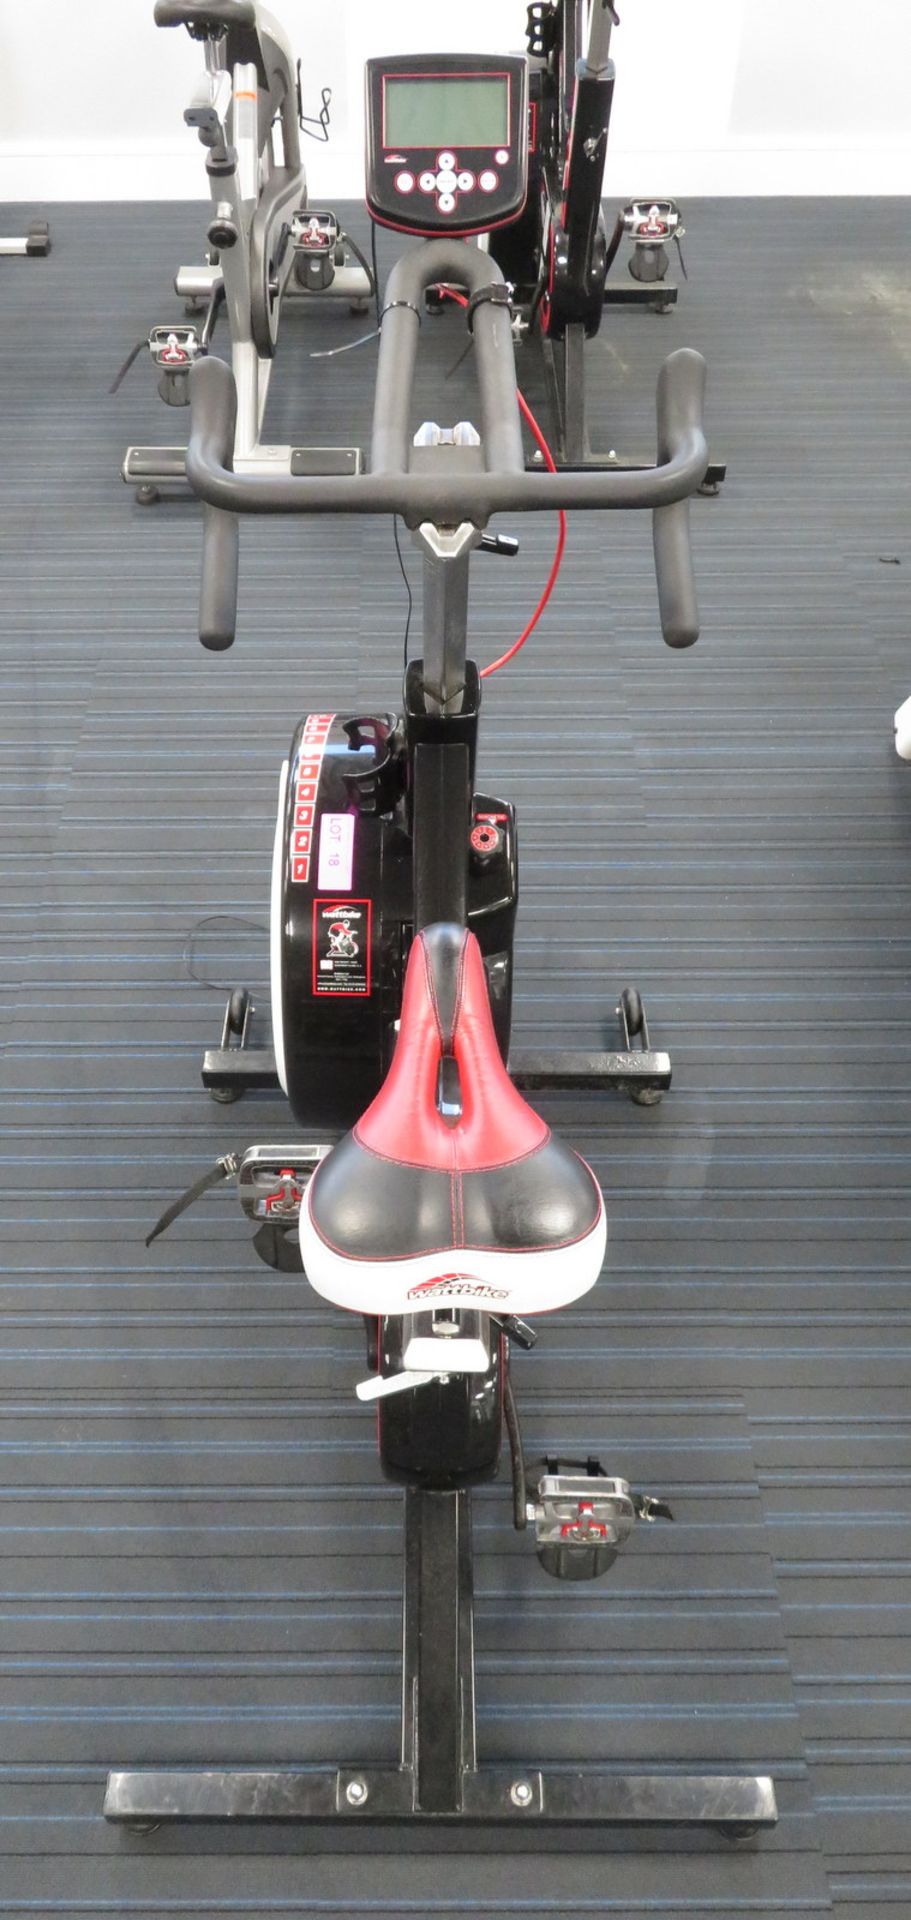 Watt Bike Pro Exercise Bike, Complete With Model B Display Console. - Image 2 of 11